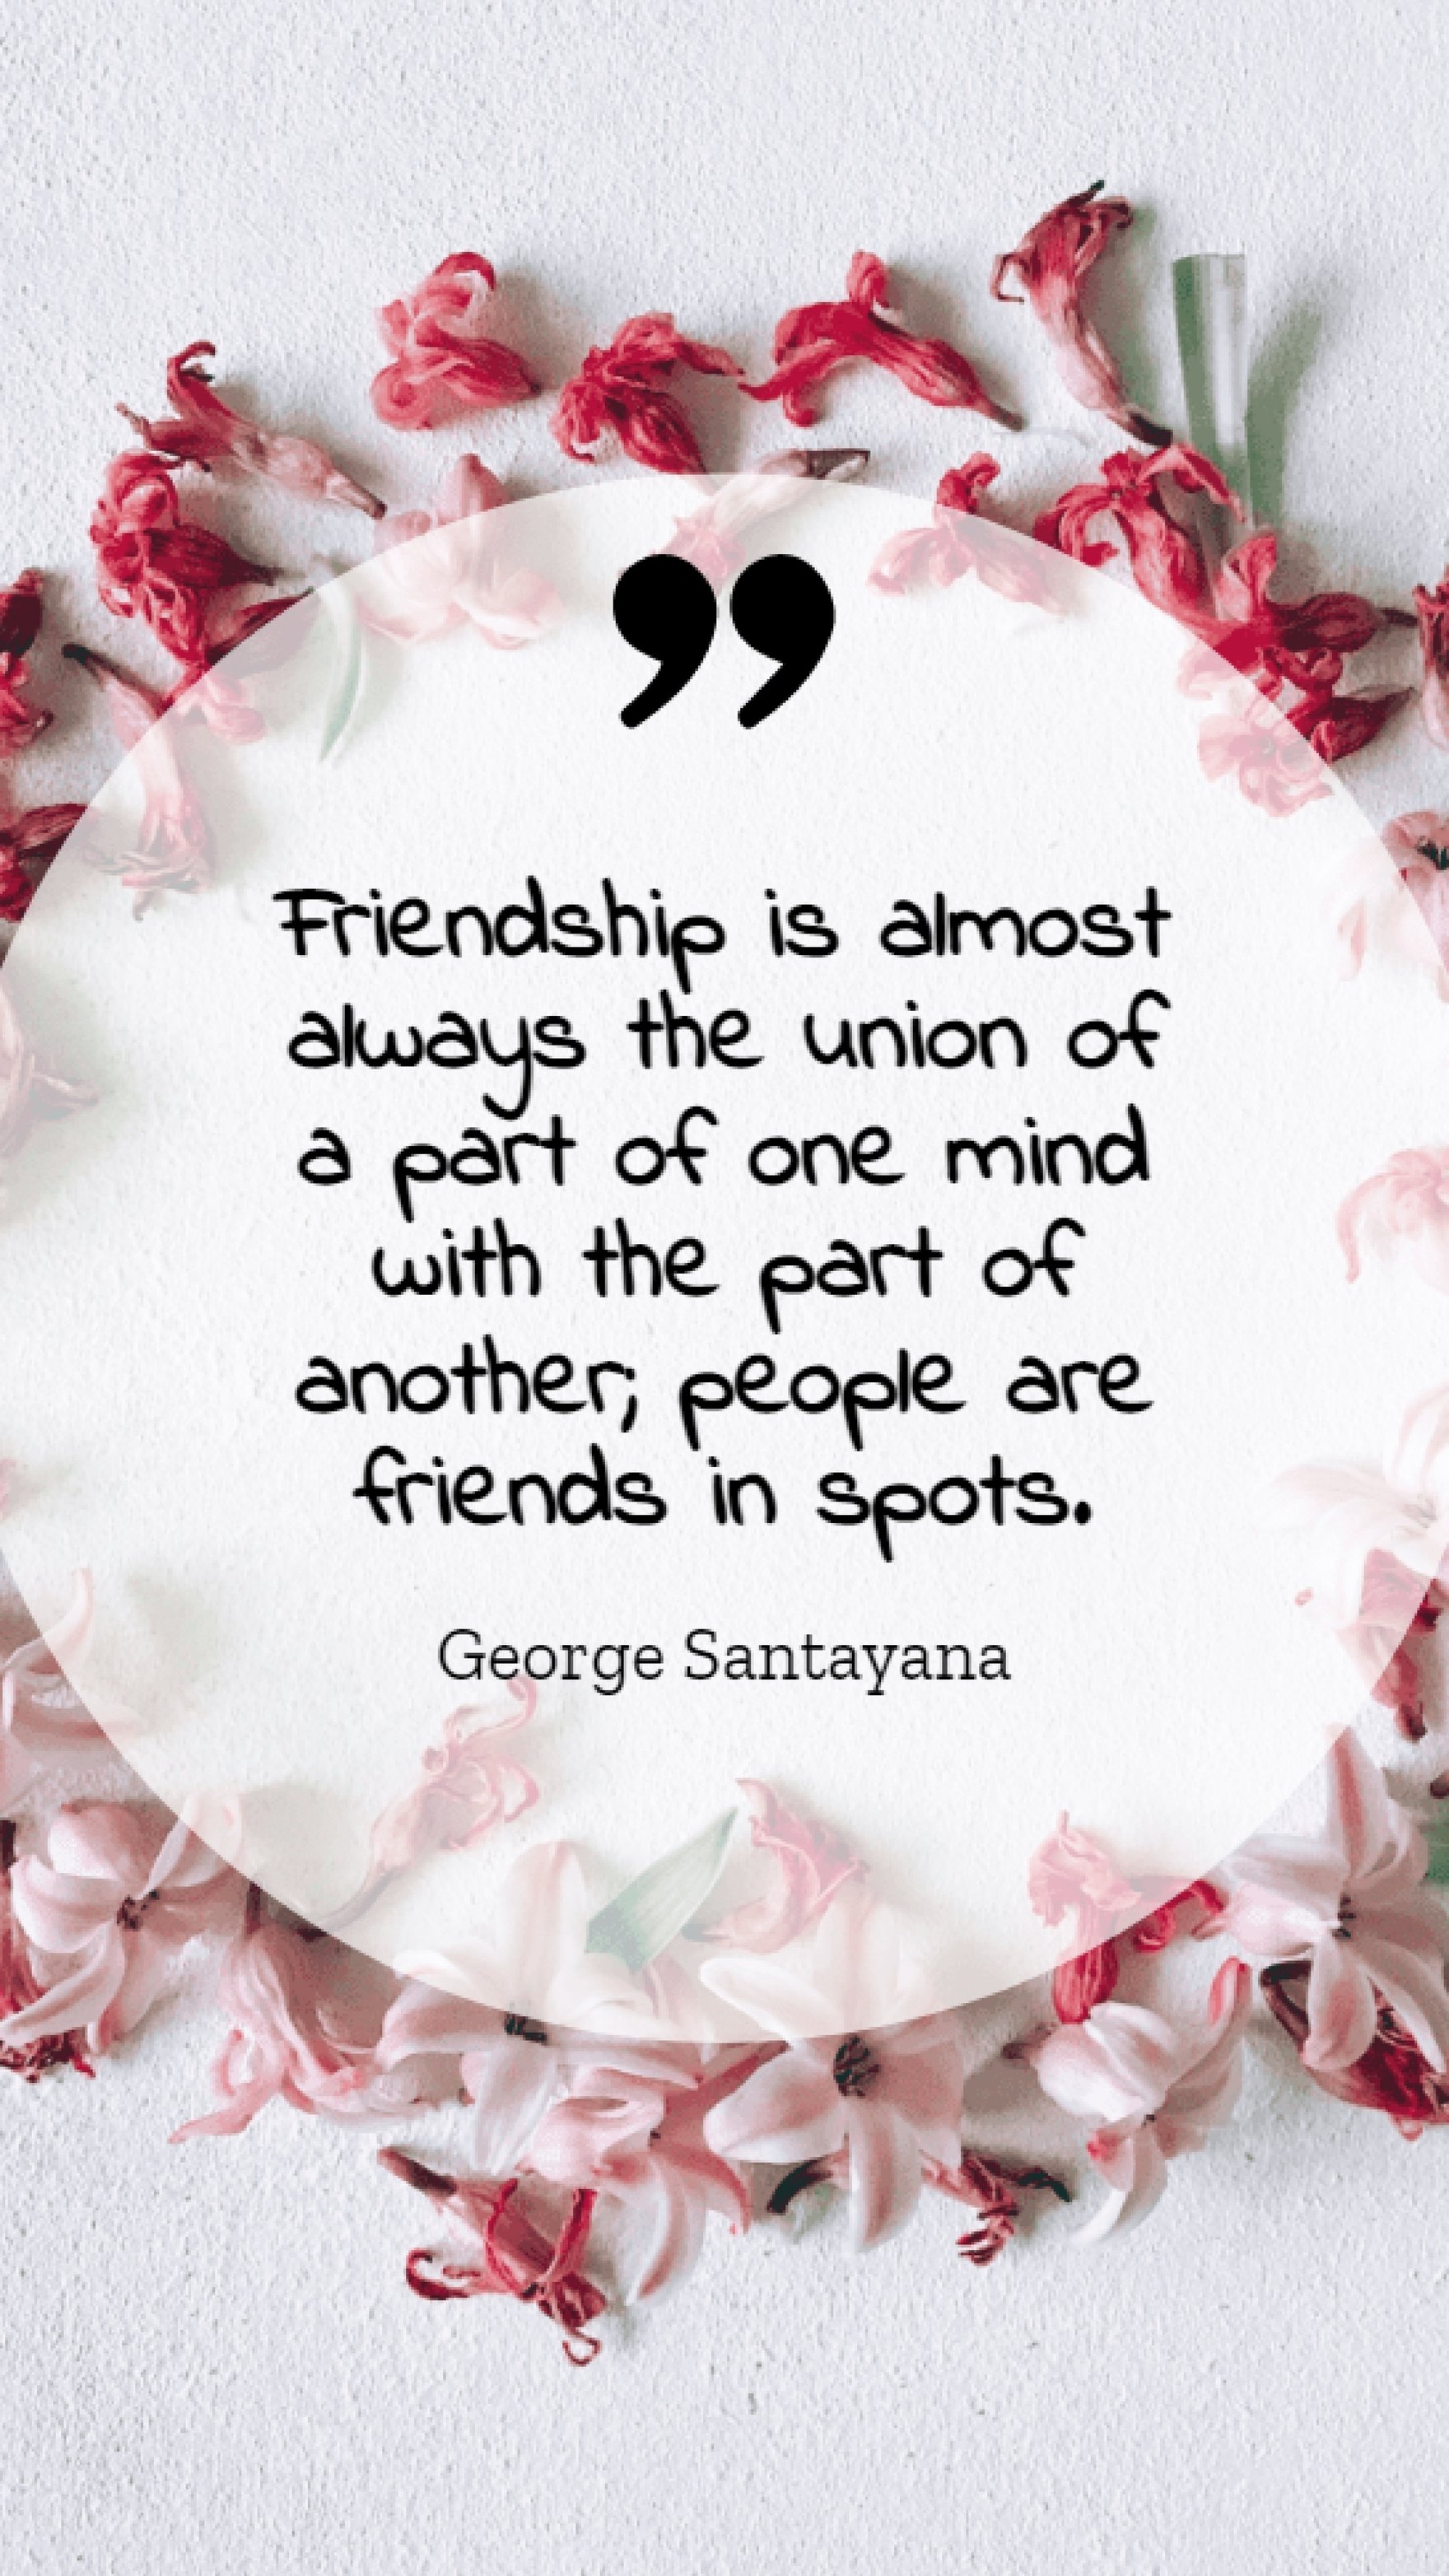 George Santayana - Friendship is almost always the union of a part of one mind with the part of another; people are friends in spots. Template